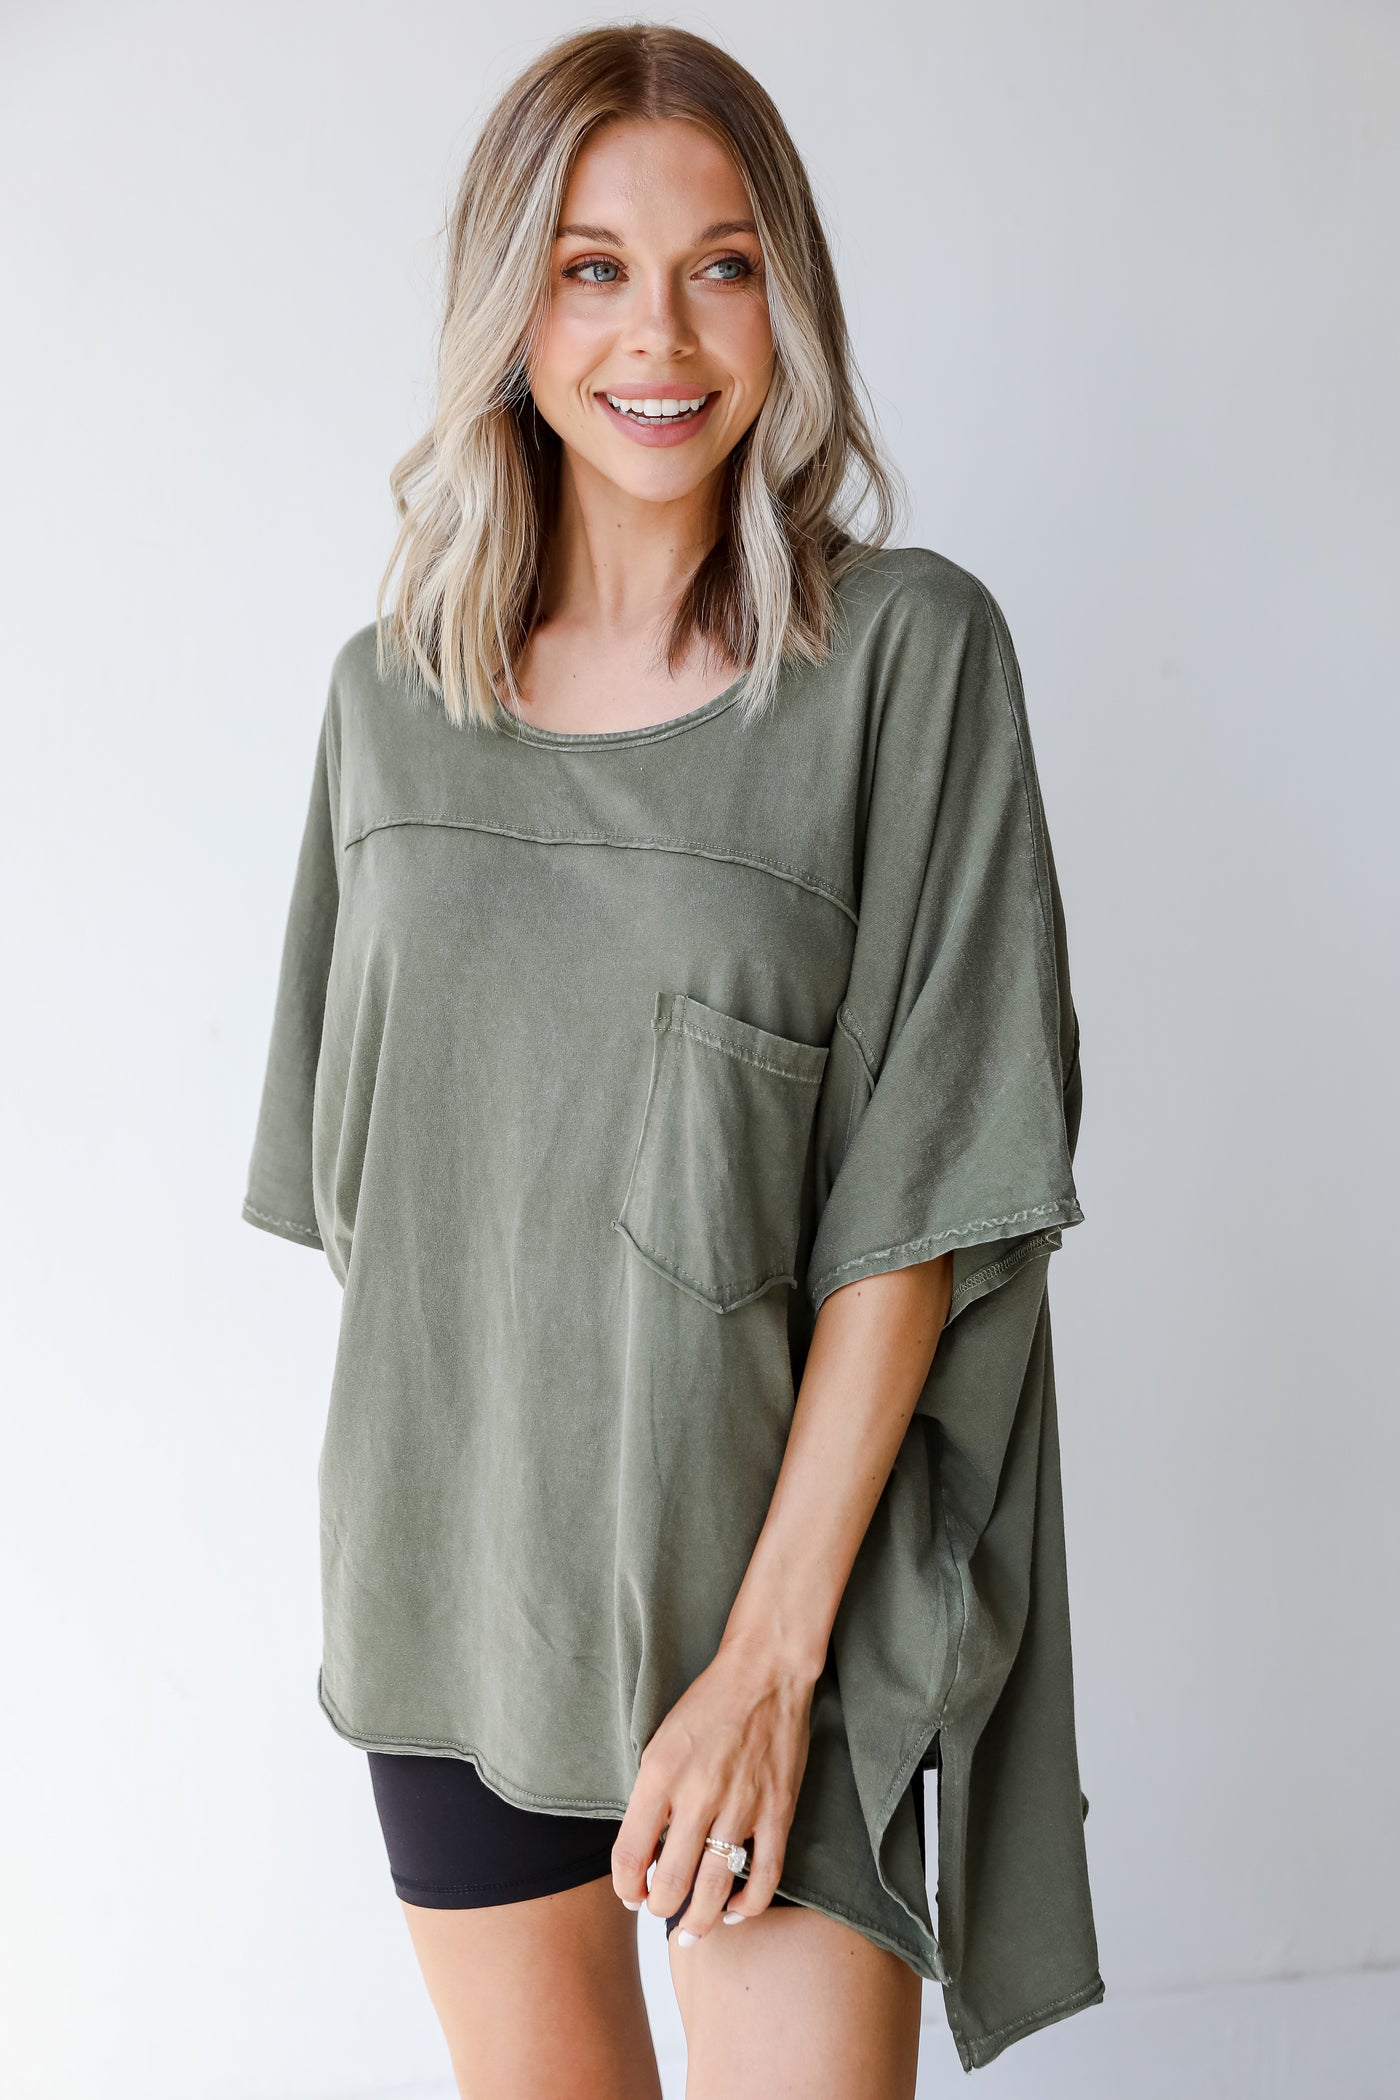 Oversized Tee in olive on model